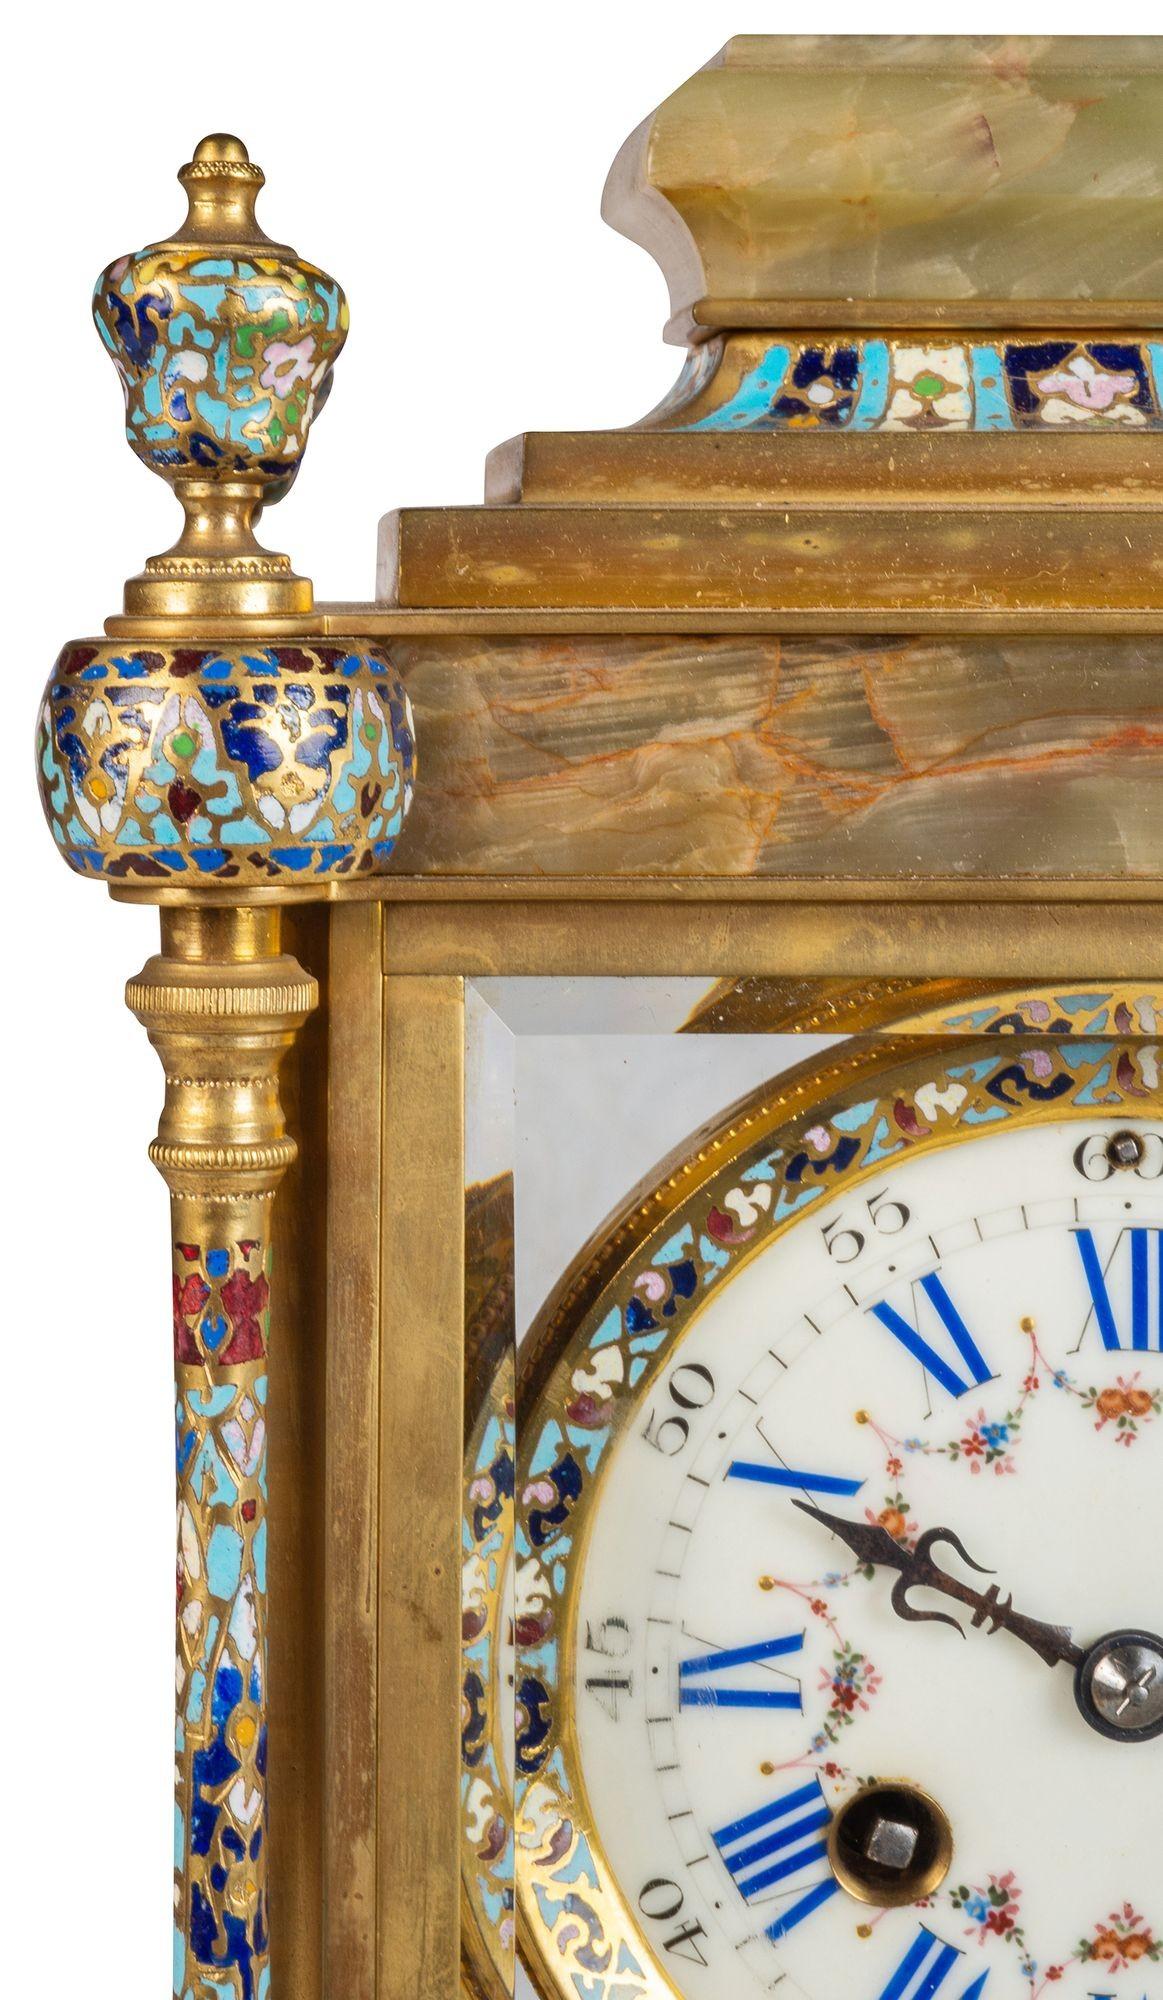 A good quality late 19th Century French Onyx, gilded ormolu and champleve enamel four glass mantel clock, having a white enamel clock face, roman numerals, an eight day duration movement, striking on the hour and half hour.

Batch 74 N/H